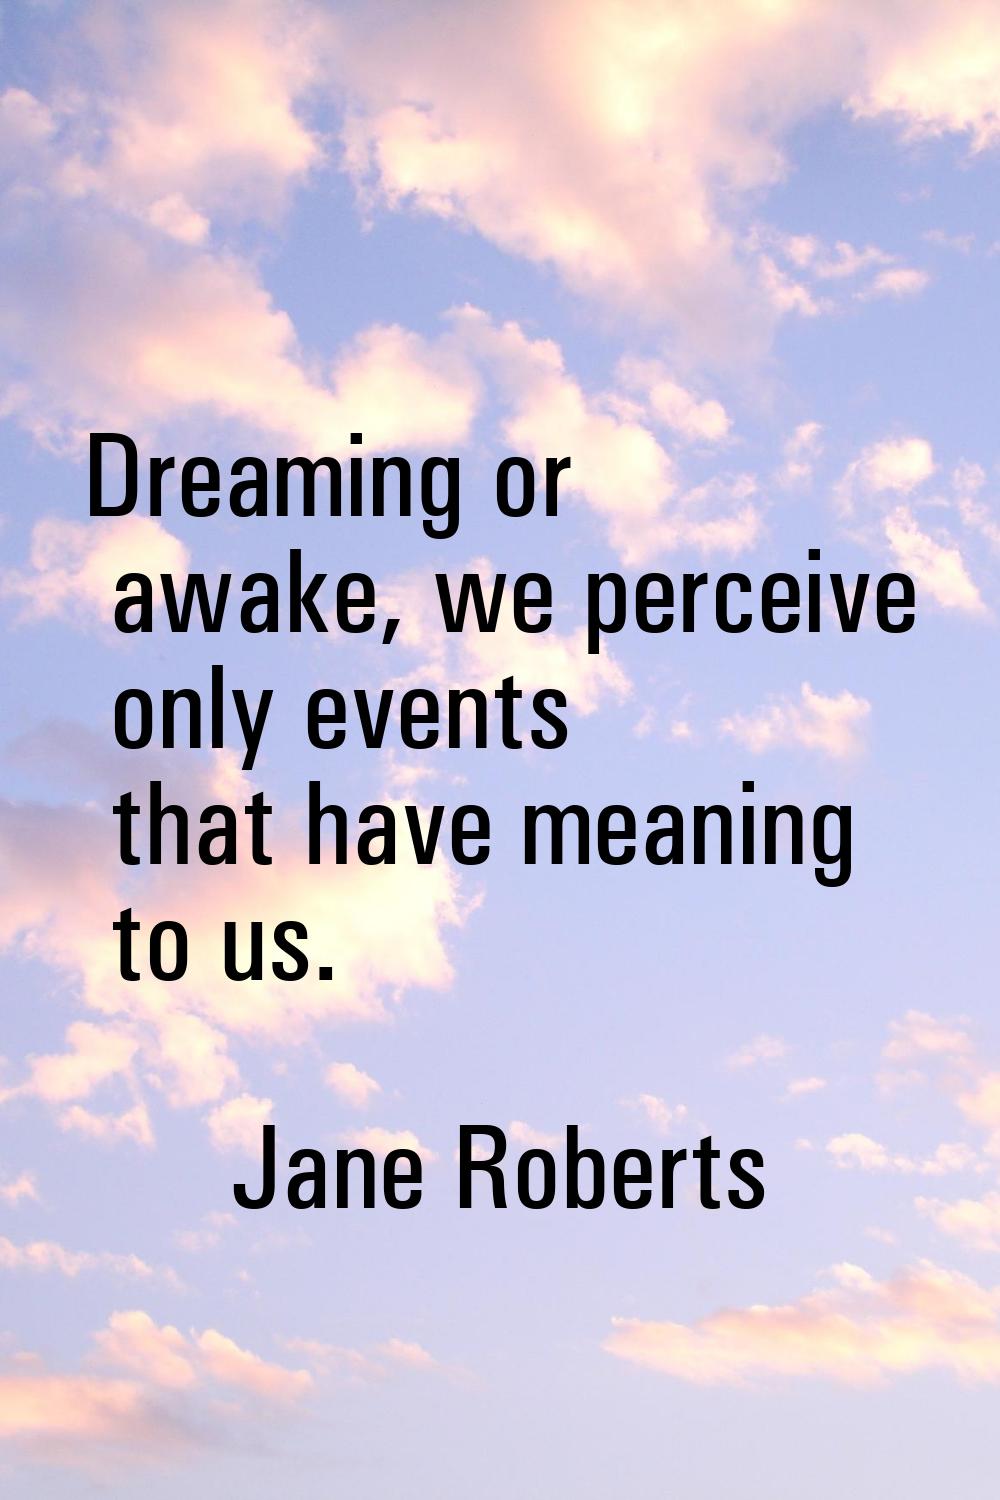 Dreaming or awake, we perceive only events that have meaning to us.